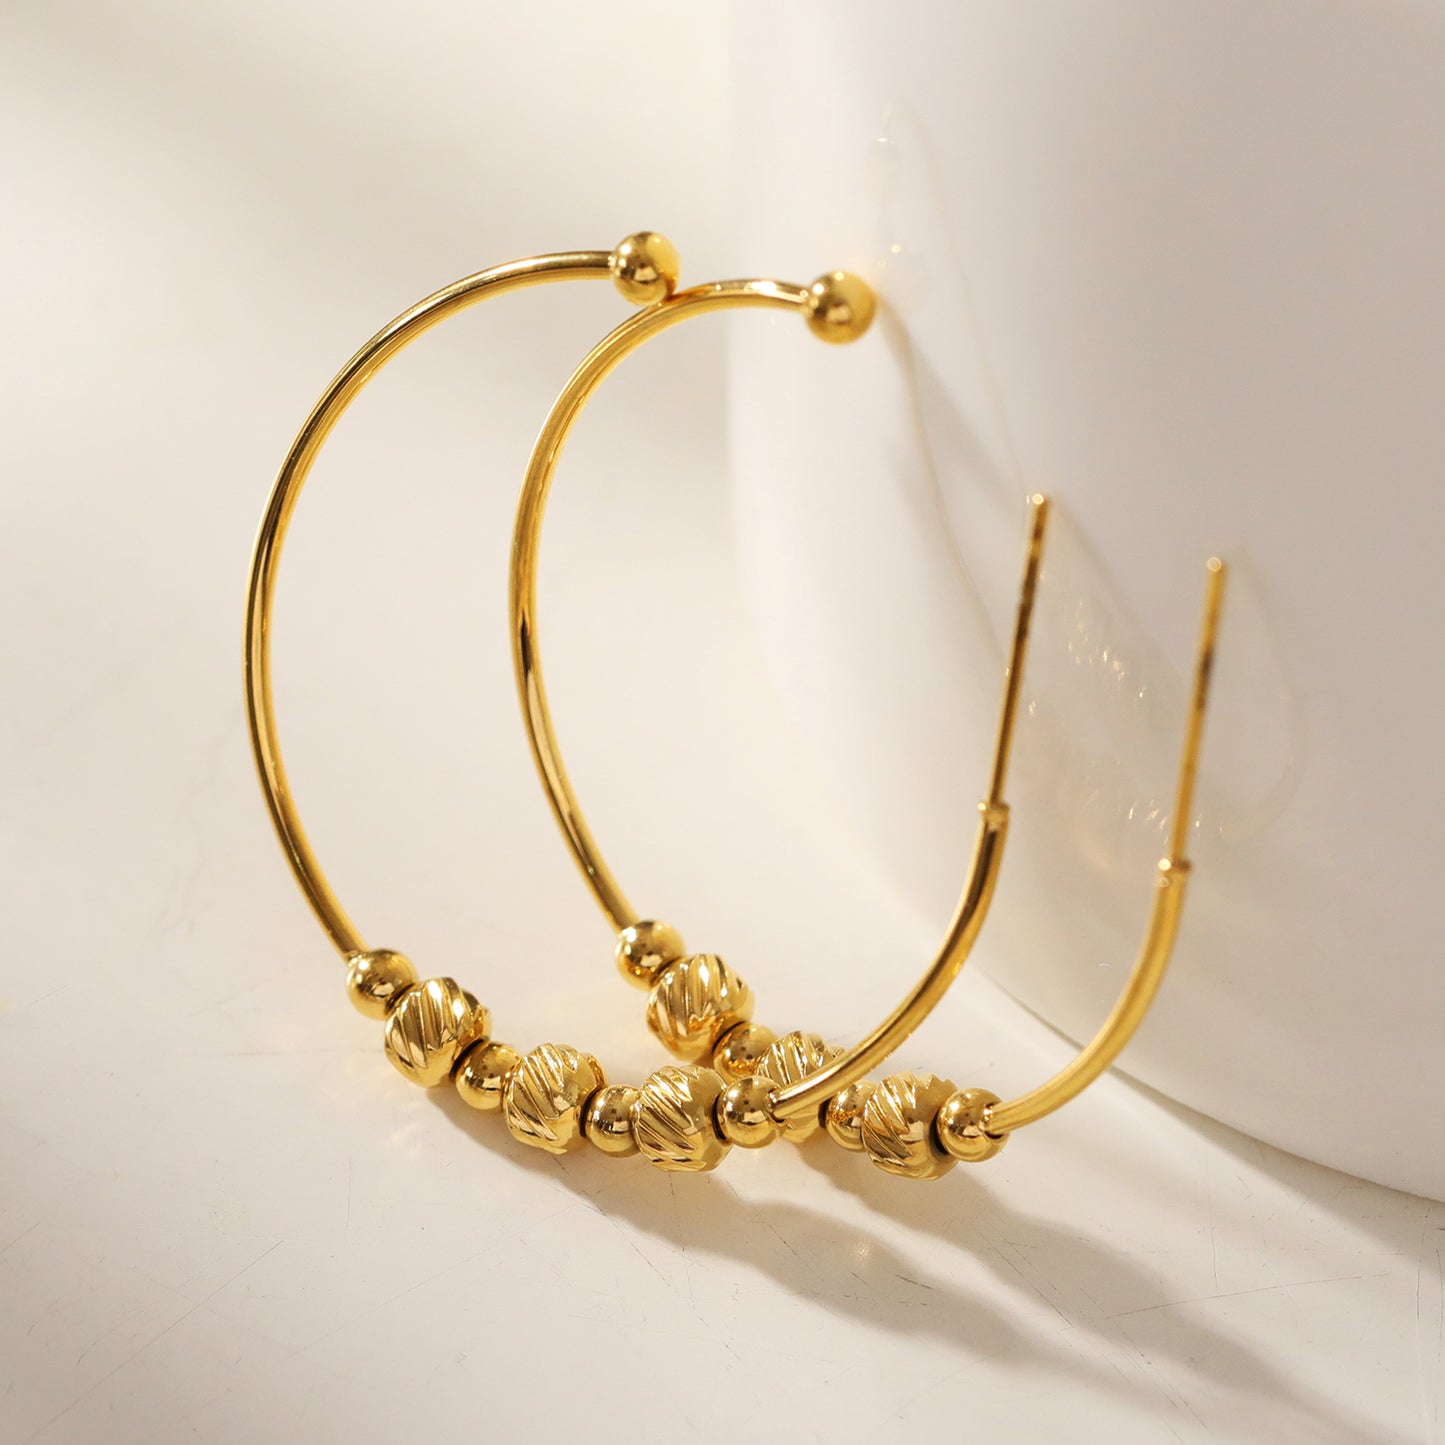 CHARIS: Classic Round Hoop Earrings Anchoring a Bevy of Charm Beads